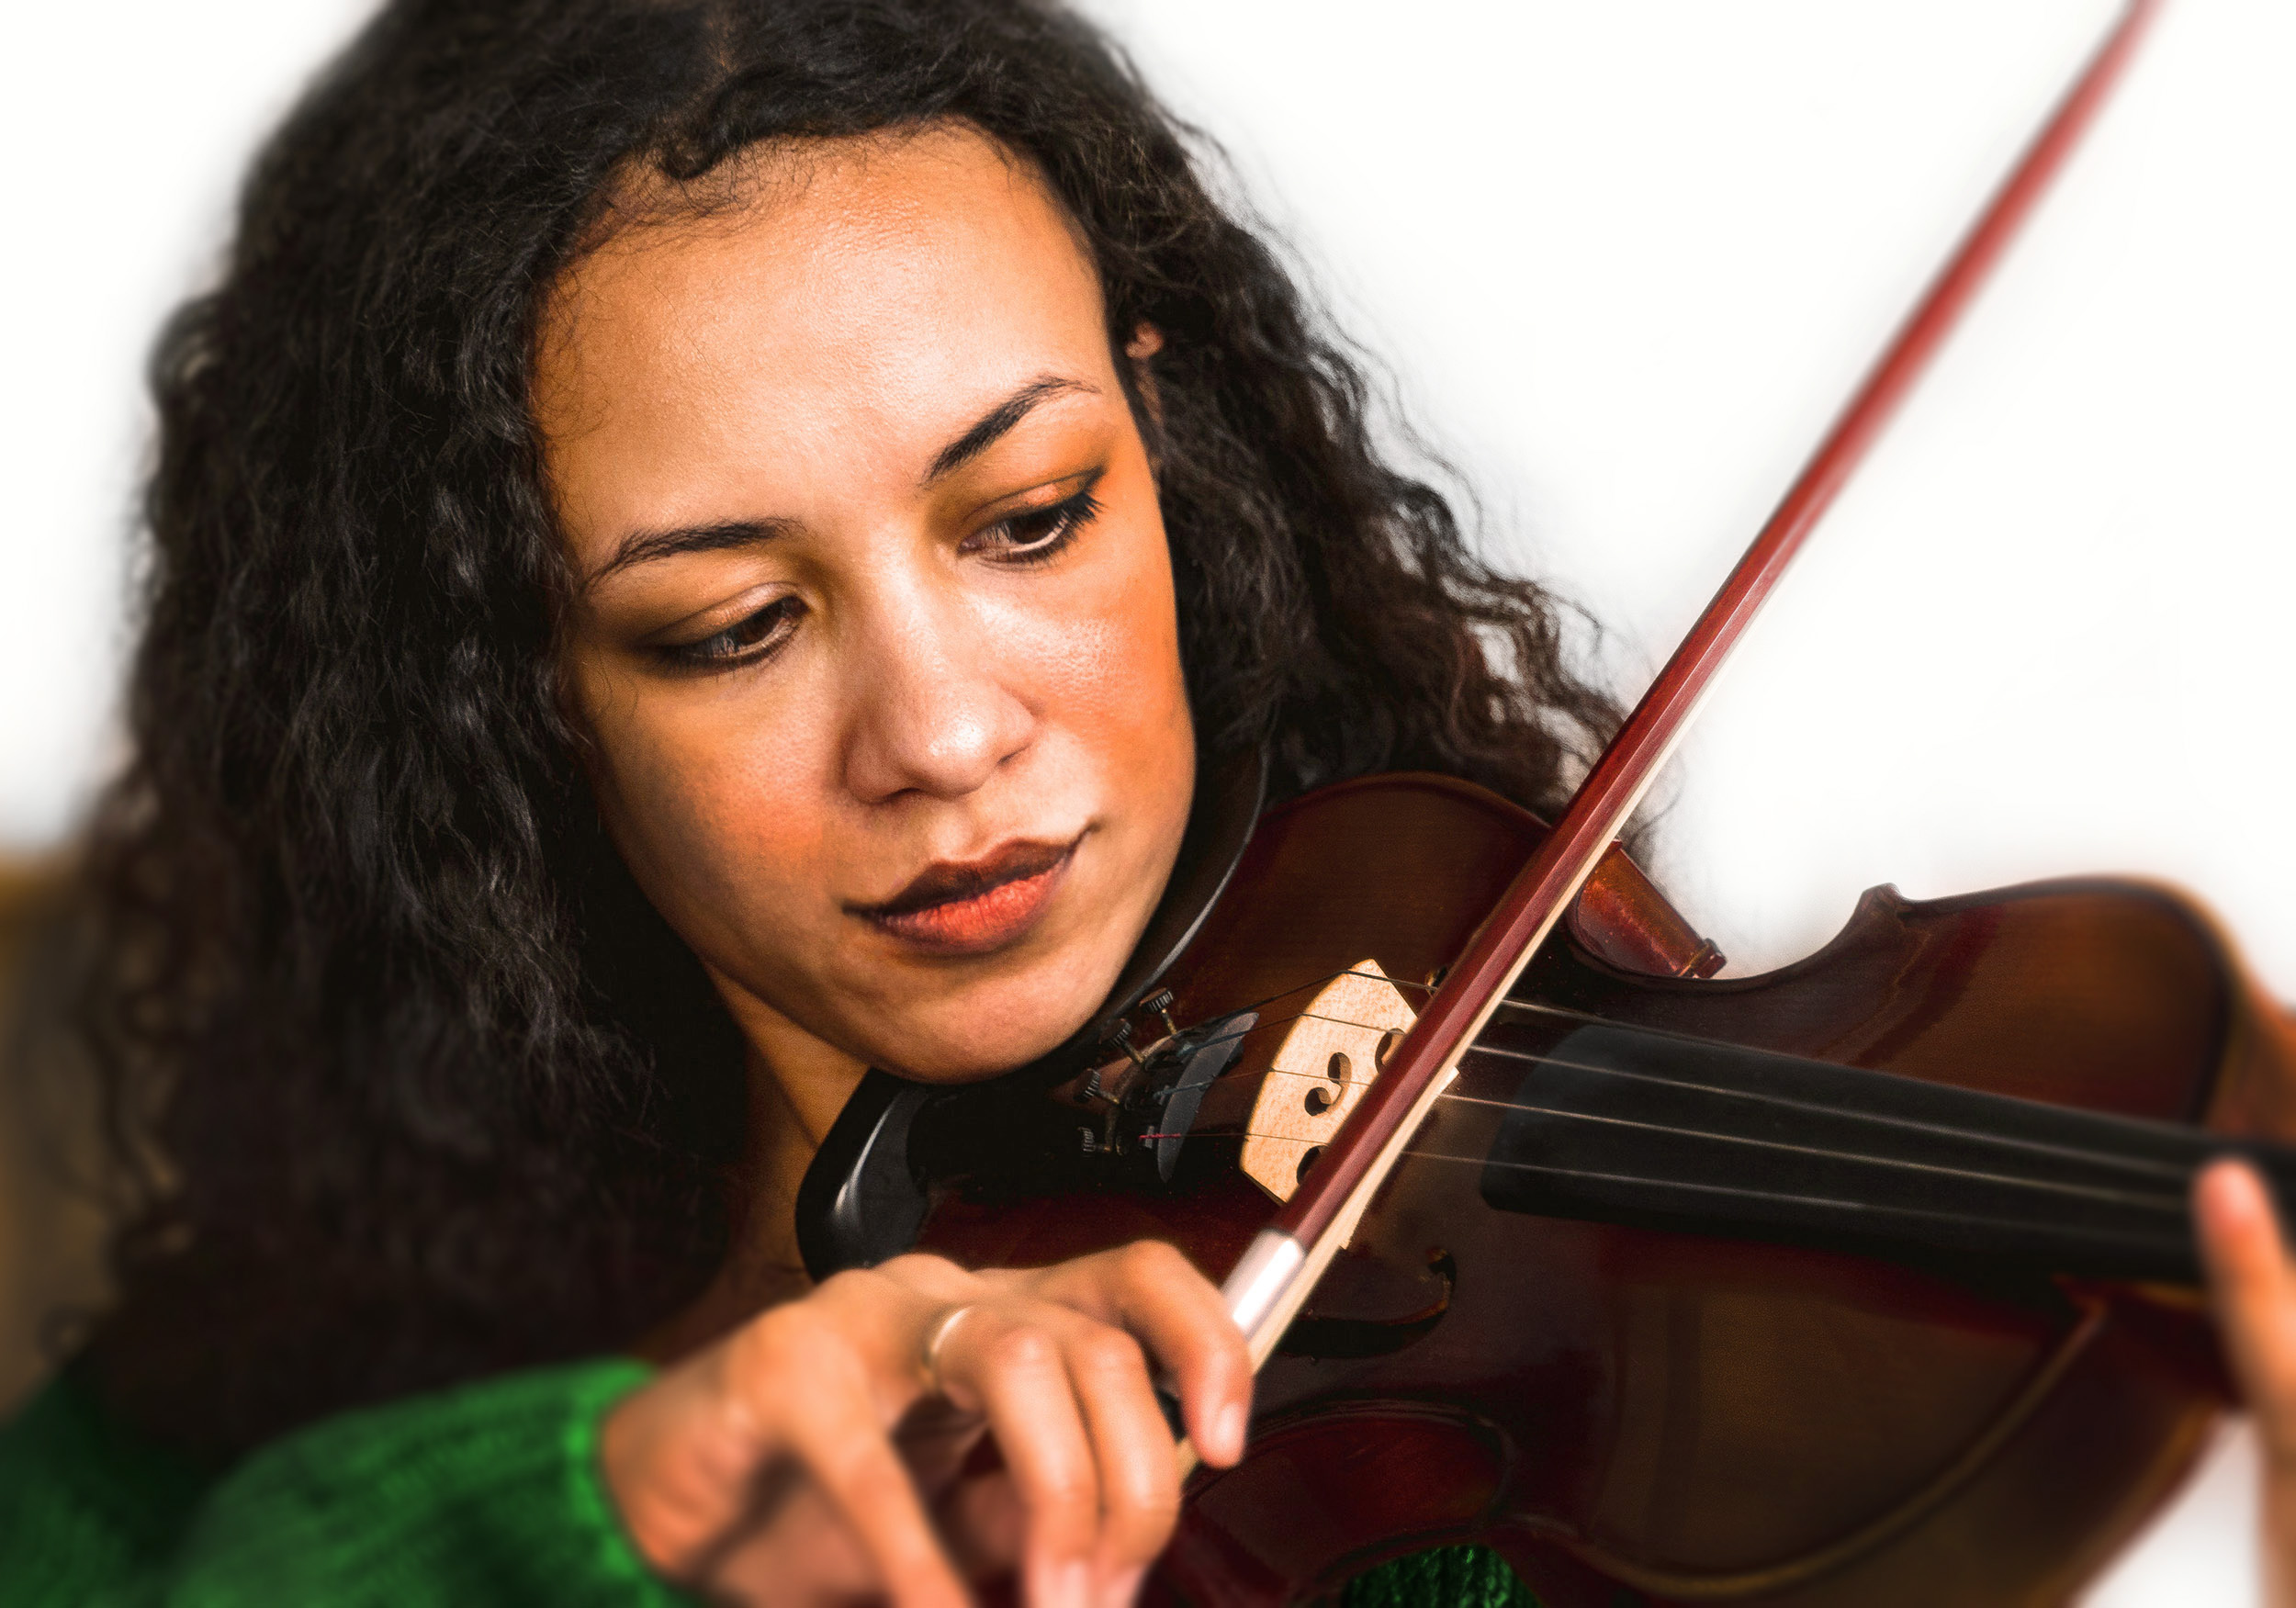 beautiful black woman with beautiful curly long hair and a green sweater smirking while playing a violin